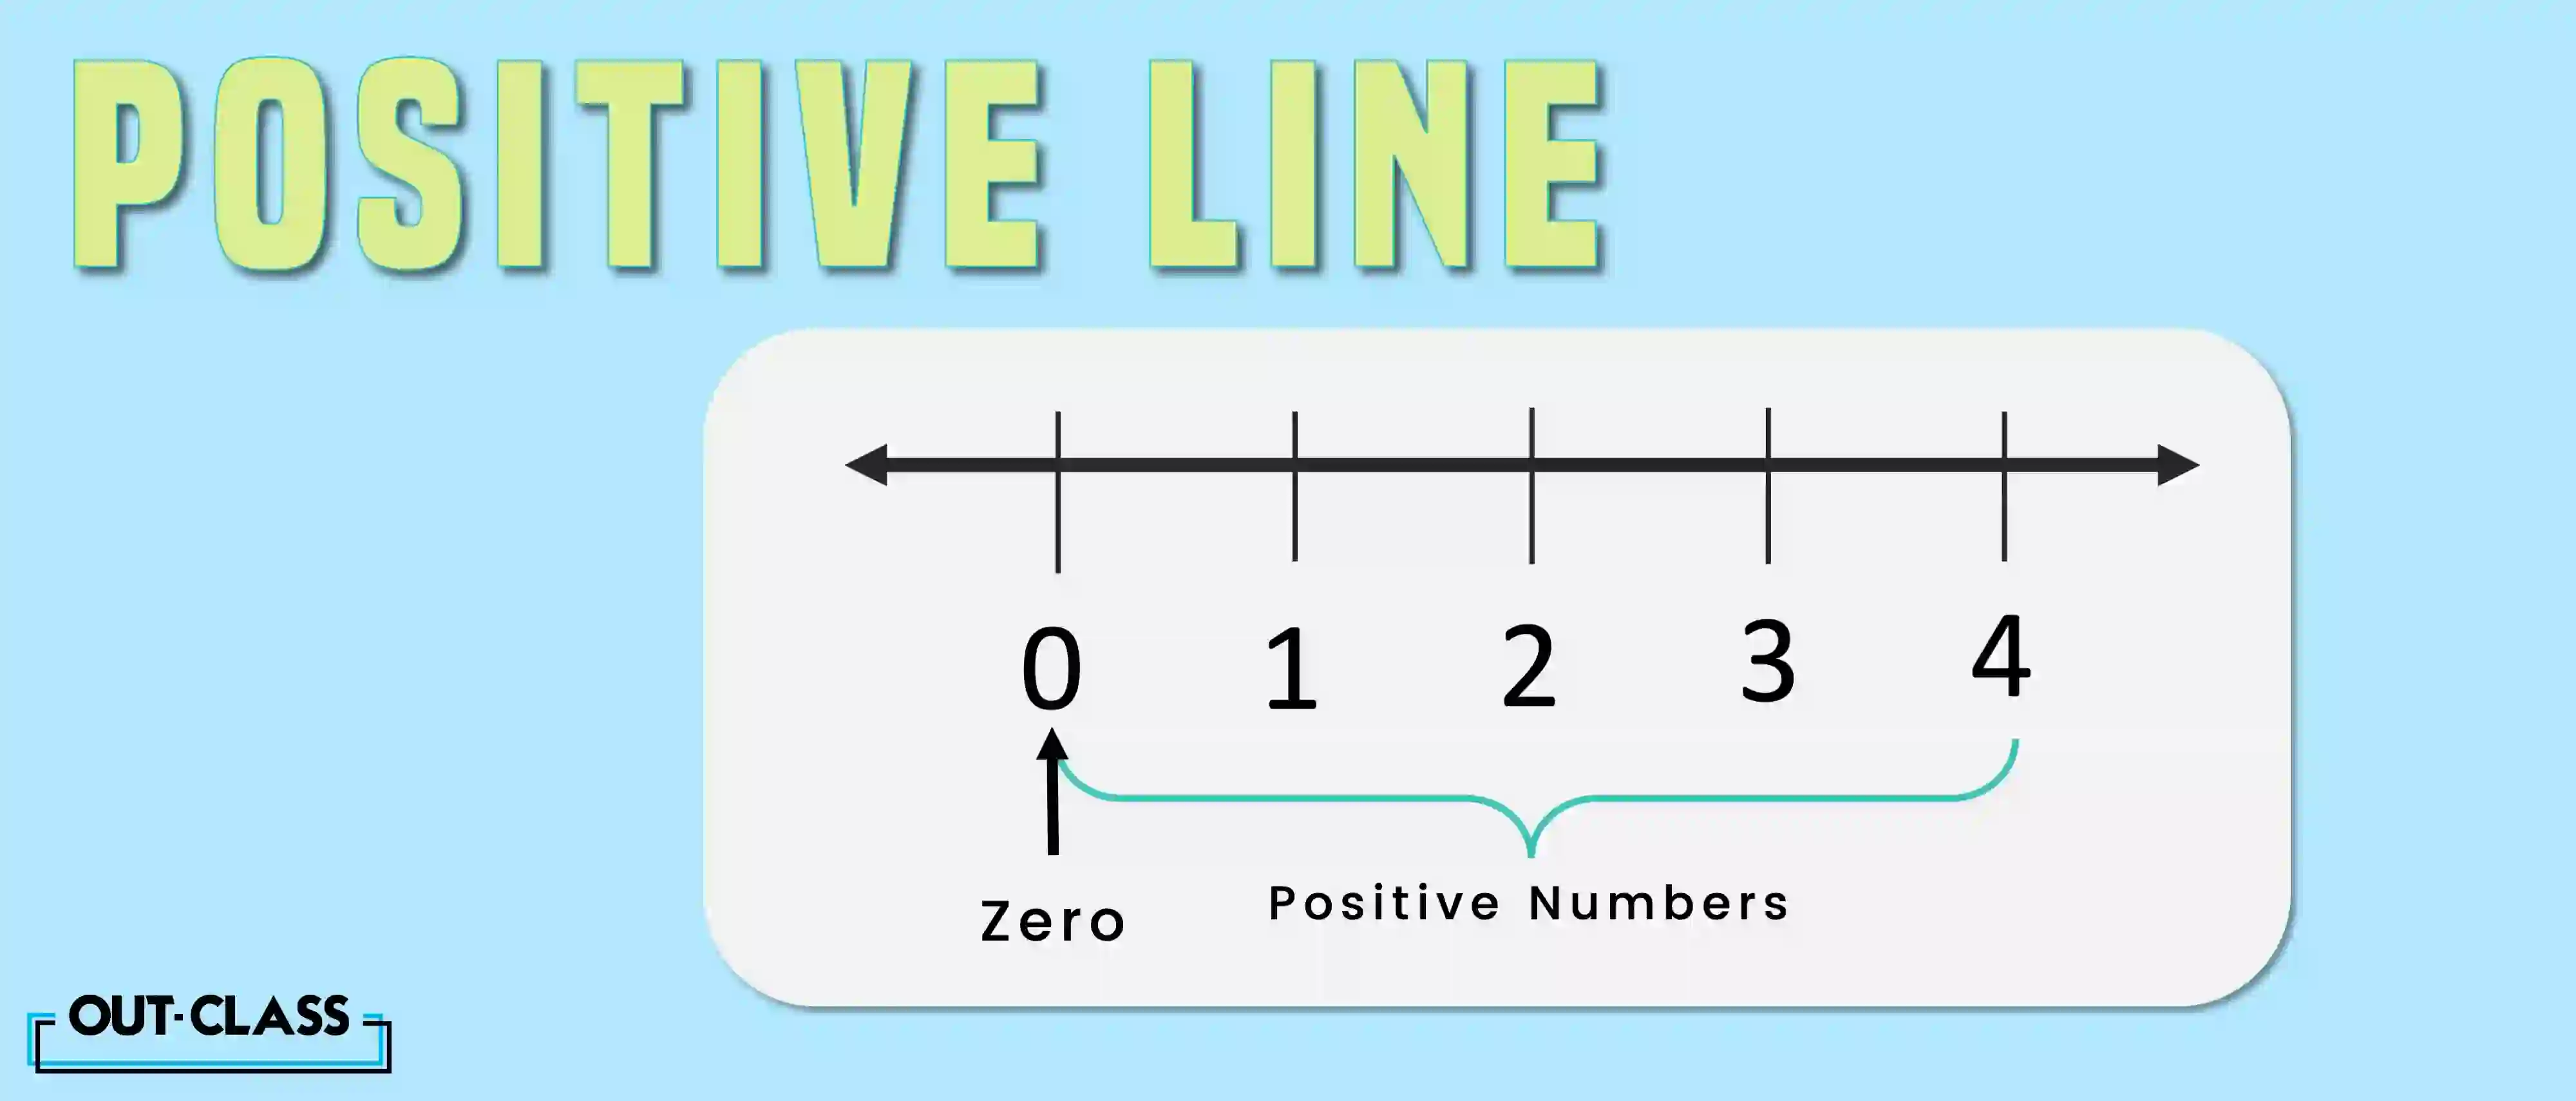 It explains what is a positive number line. Numbers that start from 0 and move towards the right on a straight line are known as positive numbers. As you move further towards the right, the numbers on the line increase.